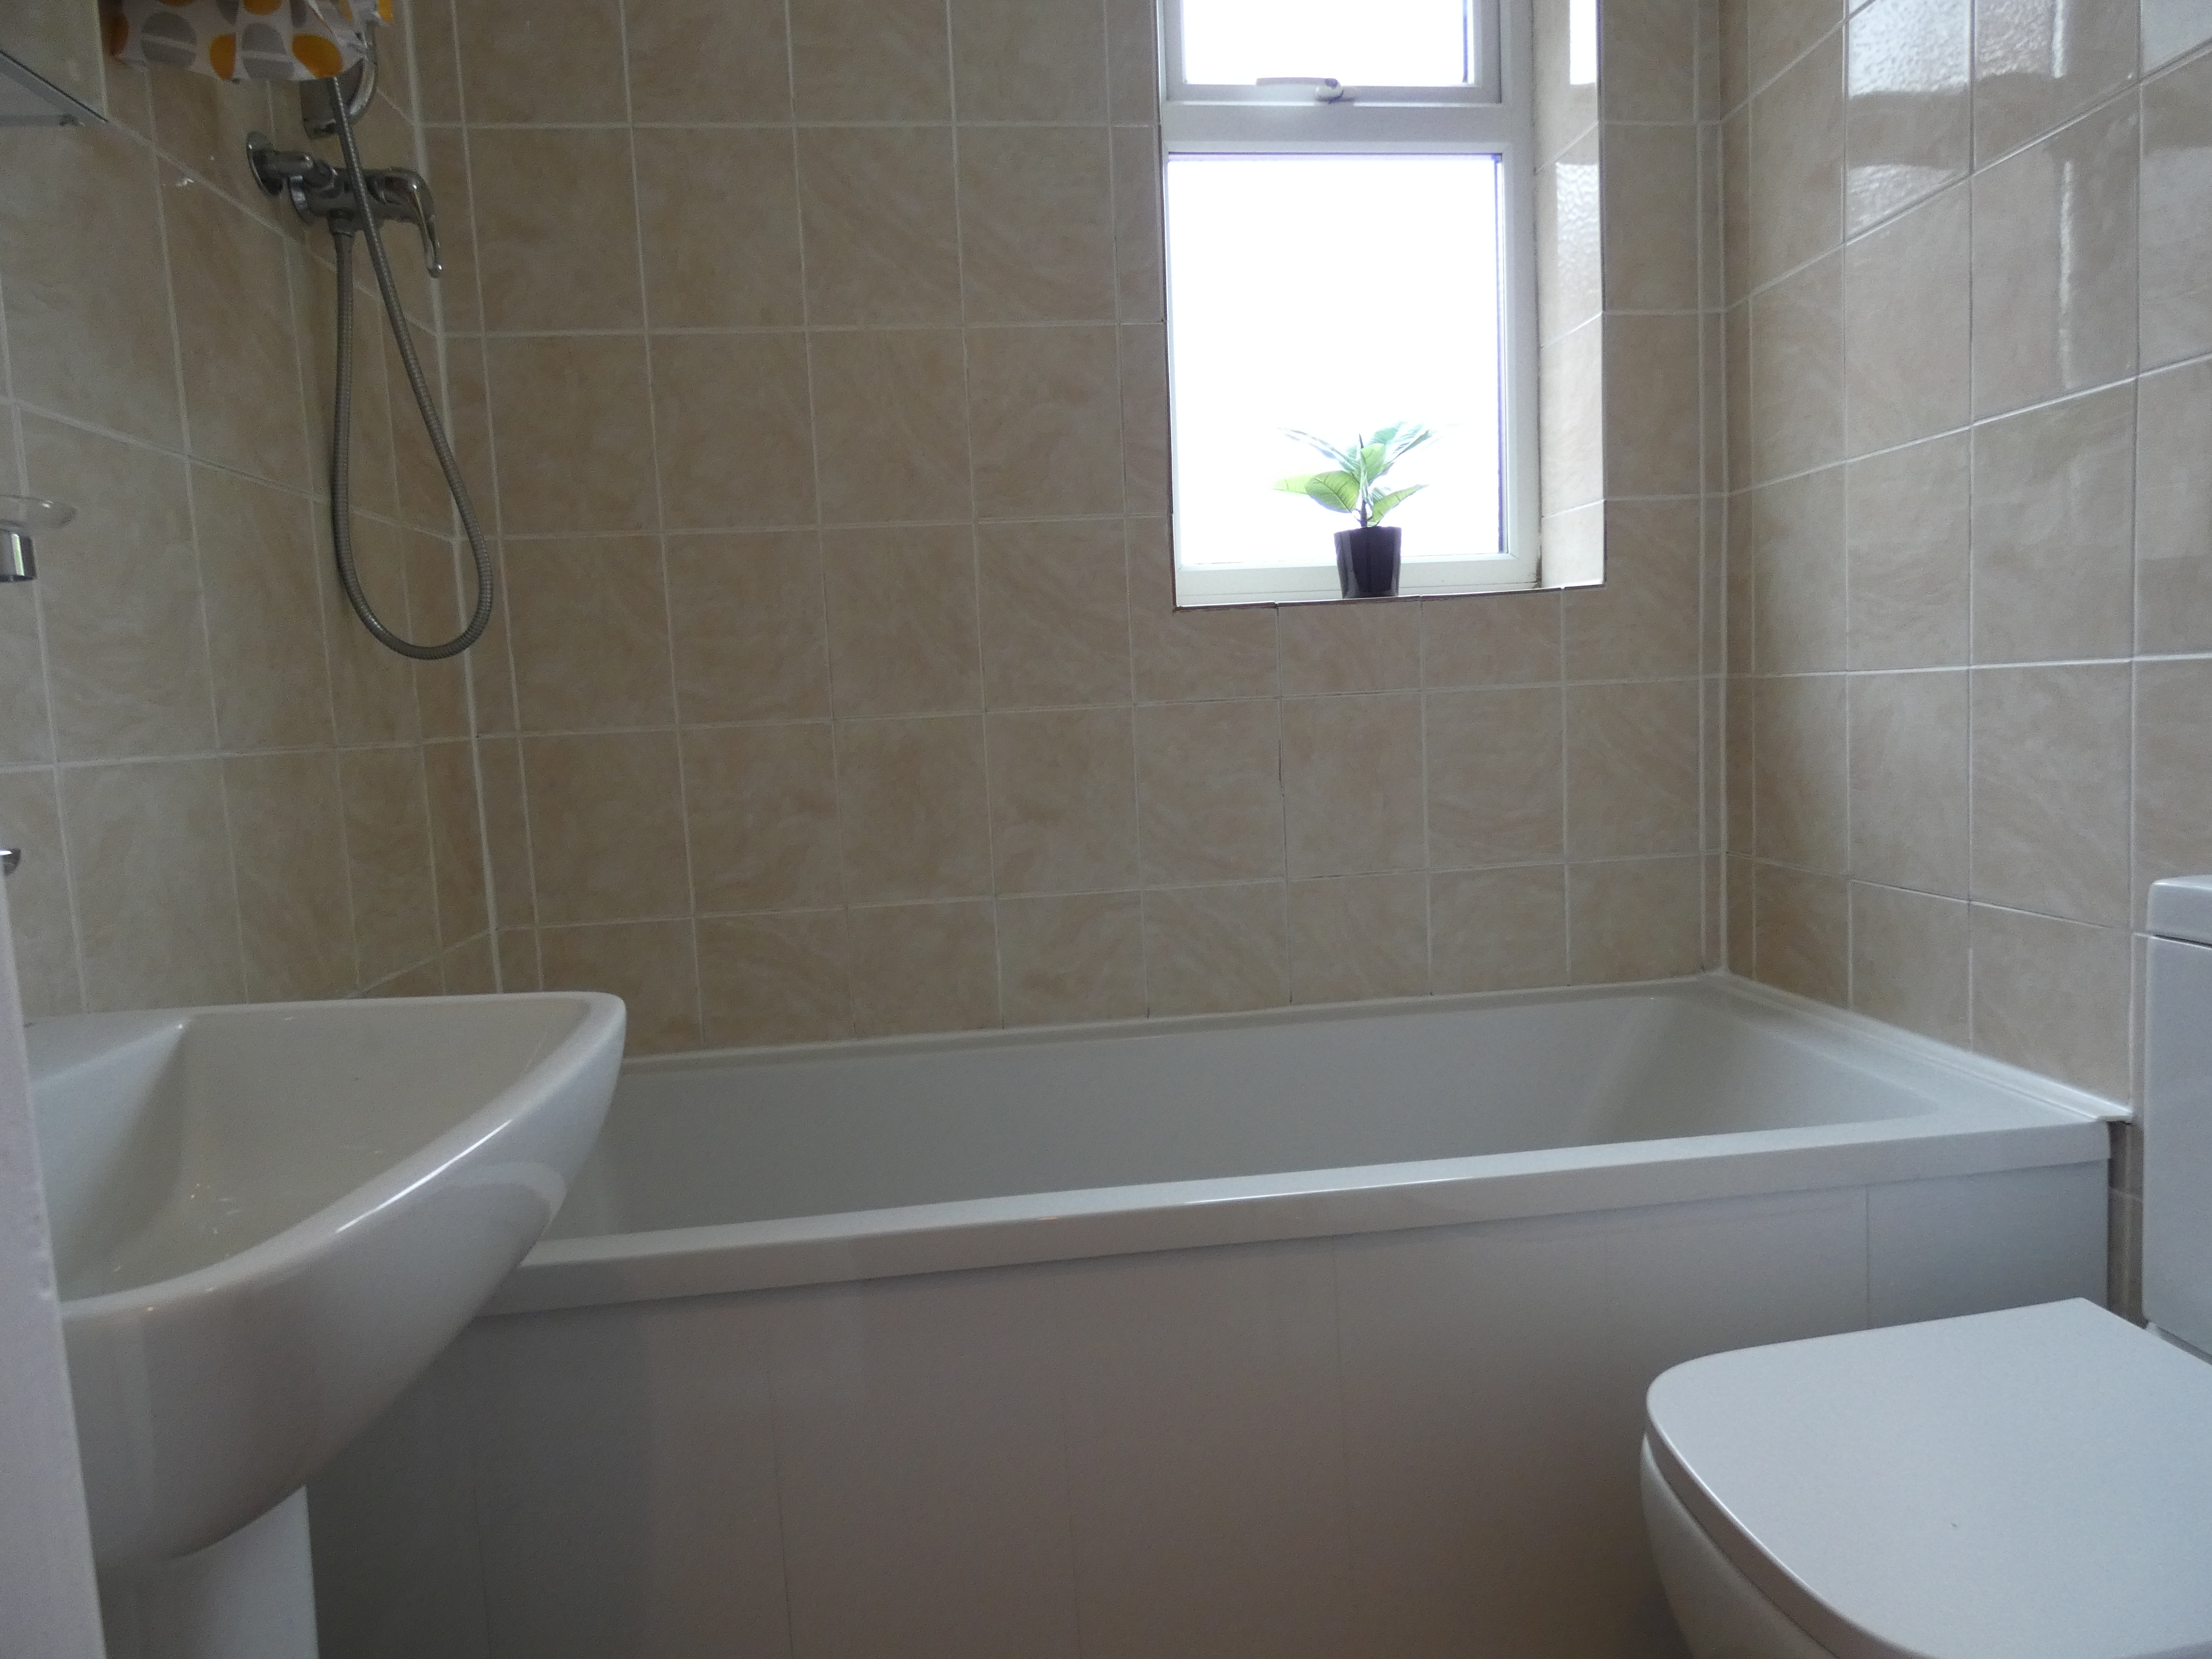 3 bed flat to rent in Warton Terrace, Newcastle upon tyne  - Property Image 3